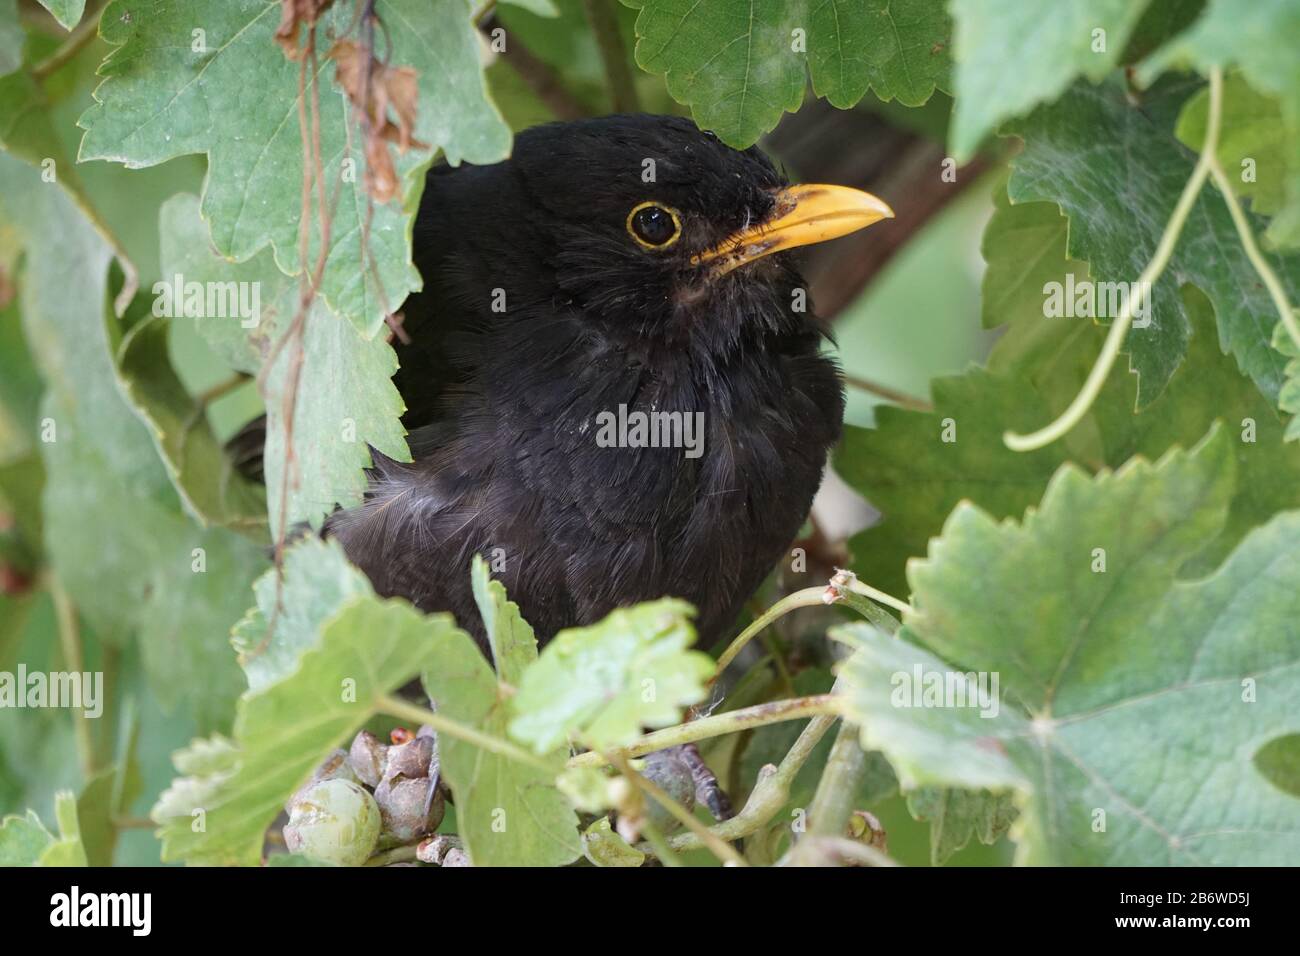 closeup of a black injured crow hiding in the leaves from the vine Stock Photo